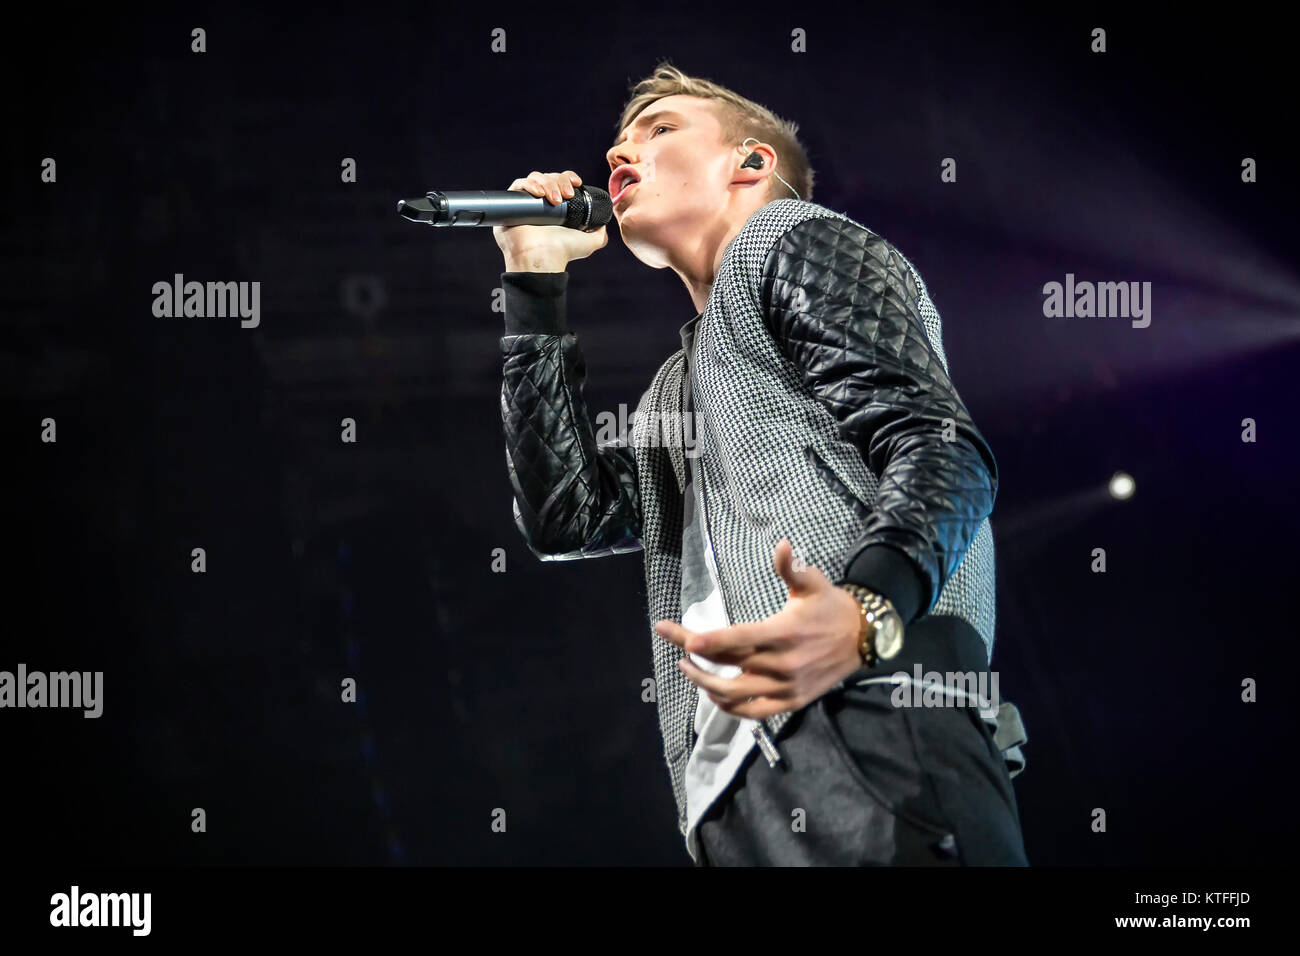 The Finnish pop singer, songwriter and dancer Isac Elliot performs a live  concert at Spektrum in Oslo. Norway, 13/12 2014 Stock Photo - Alamy